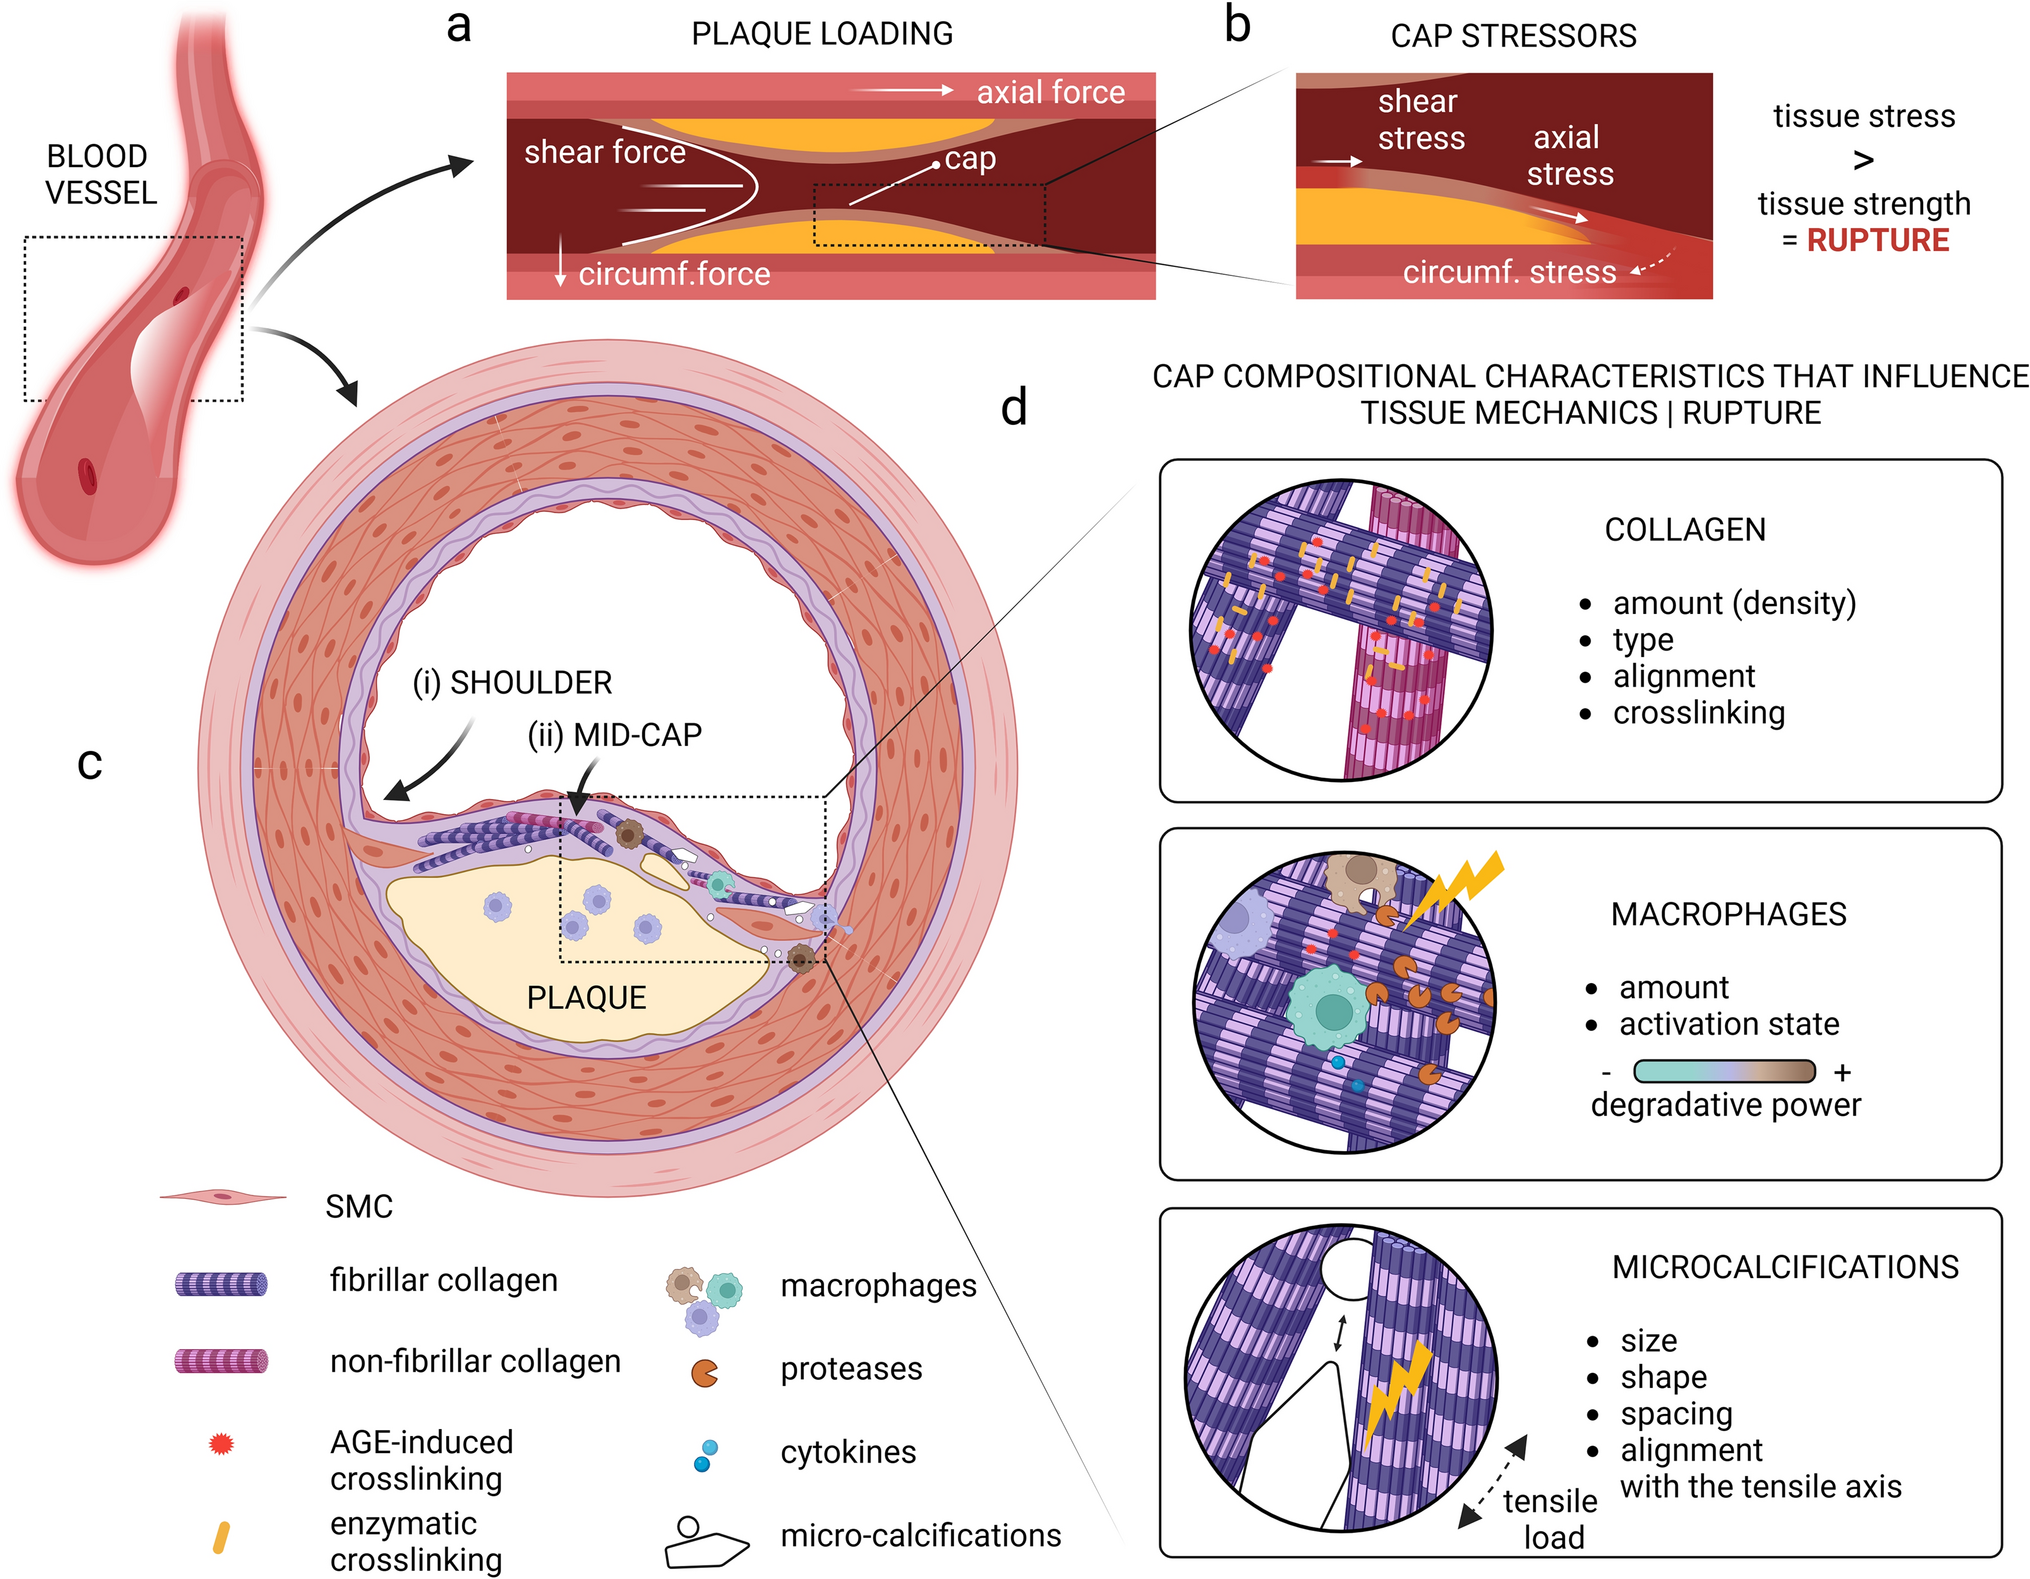 The interplay of collagen, macrophages, and microcalcification in atherosclerotic plaque cap rupture mechanics